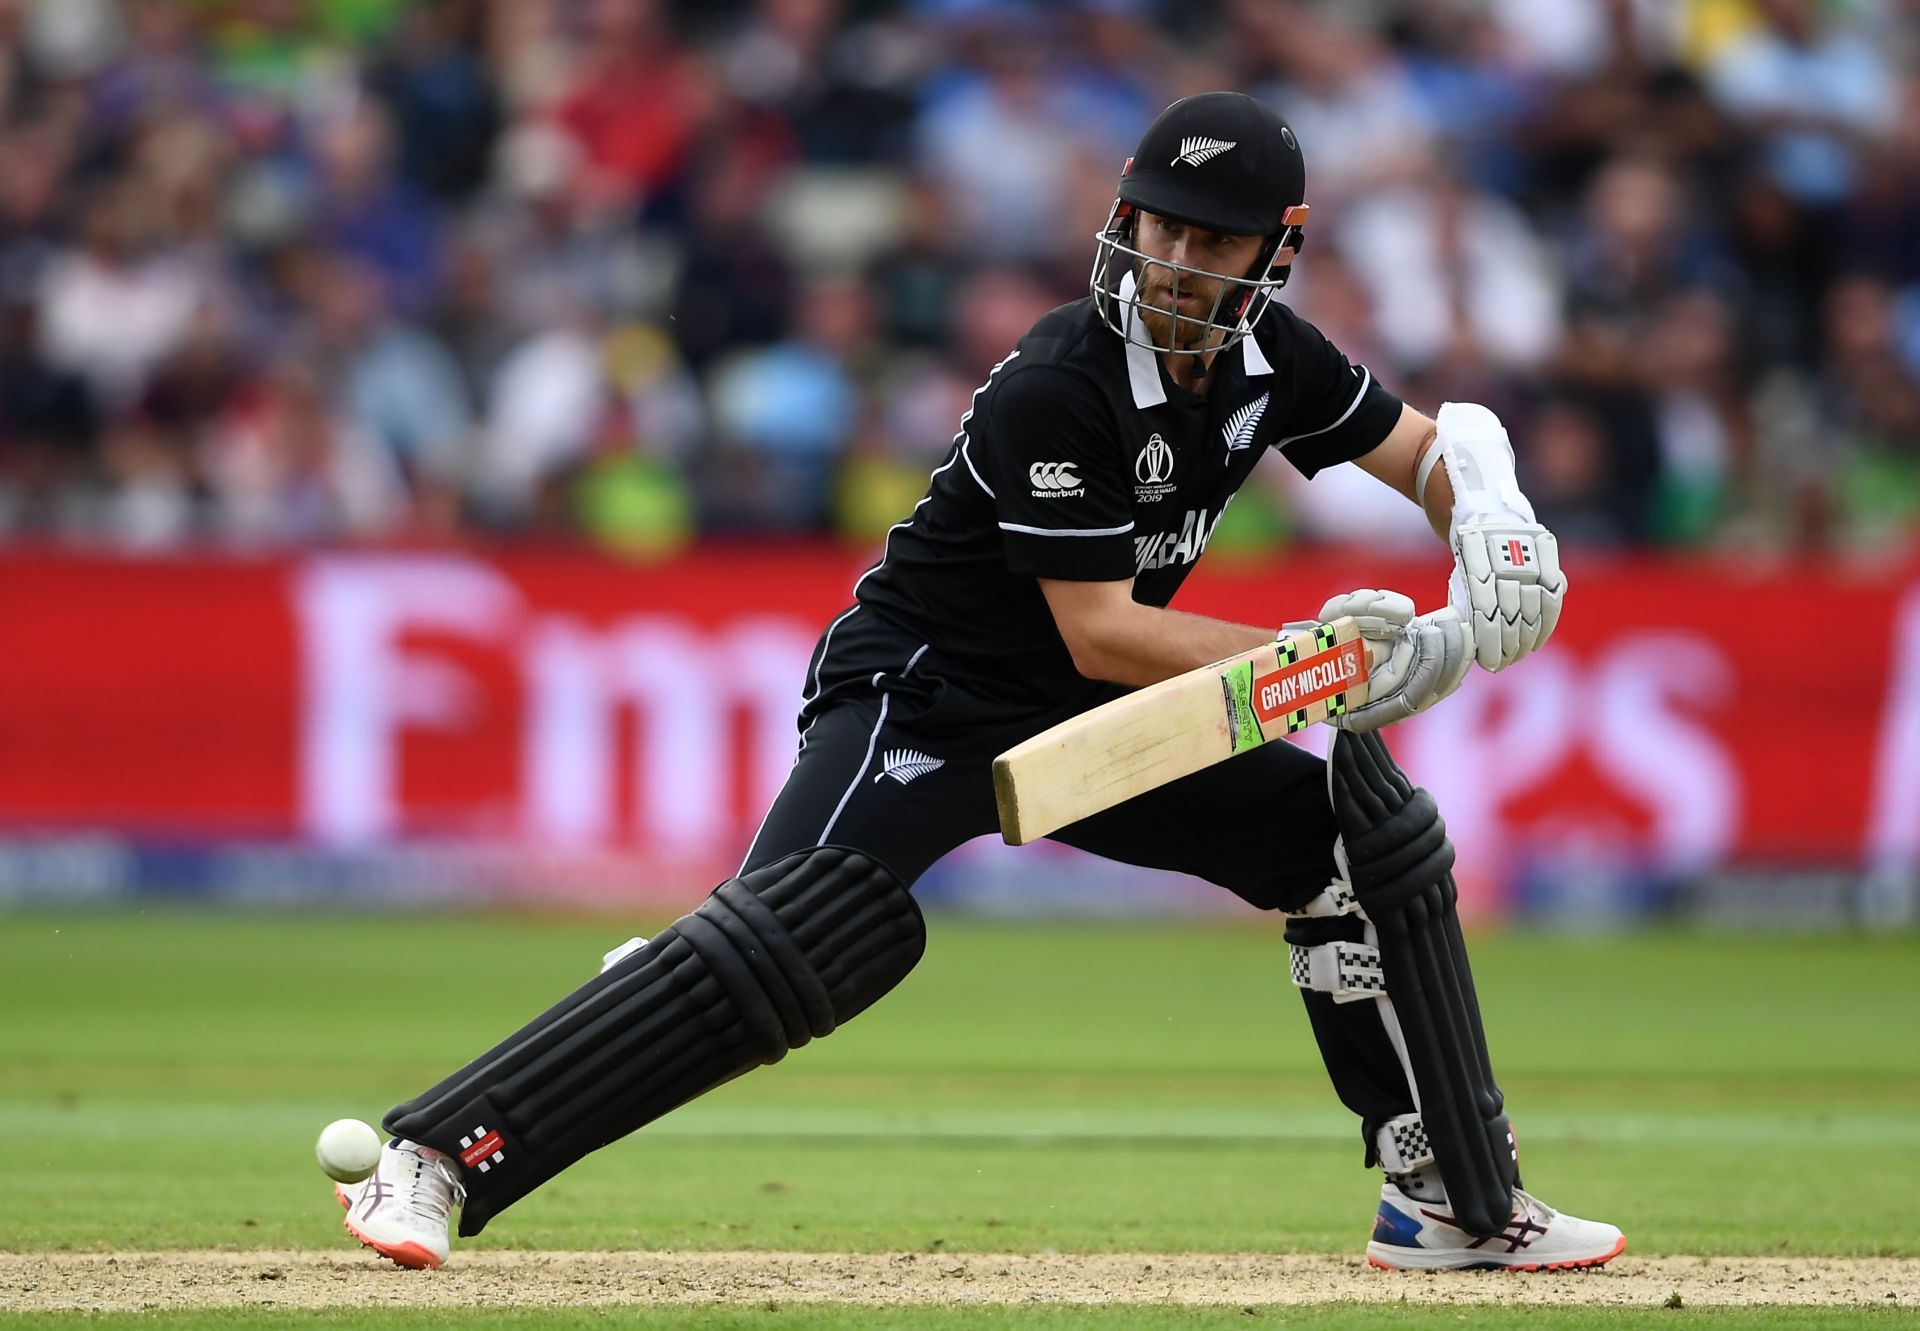 Kane Williamson took New Zealand home in a tense chase against South Africa in the 2019 World Cup